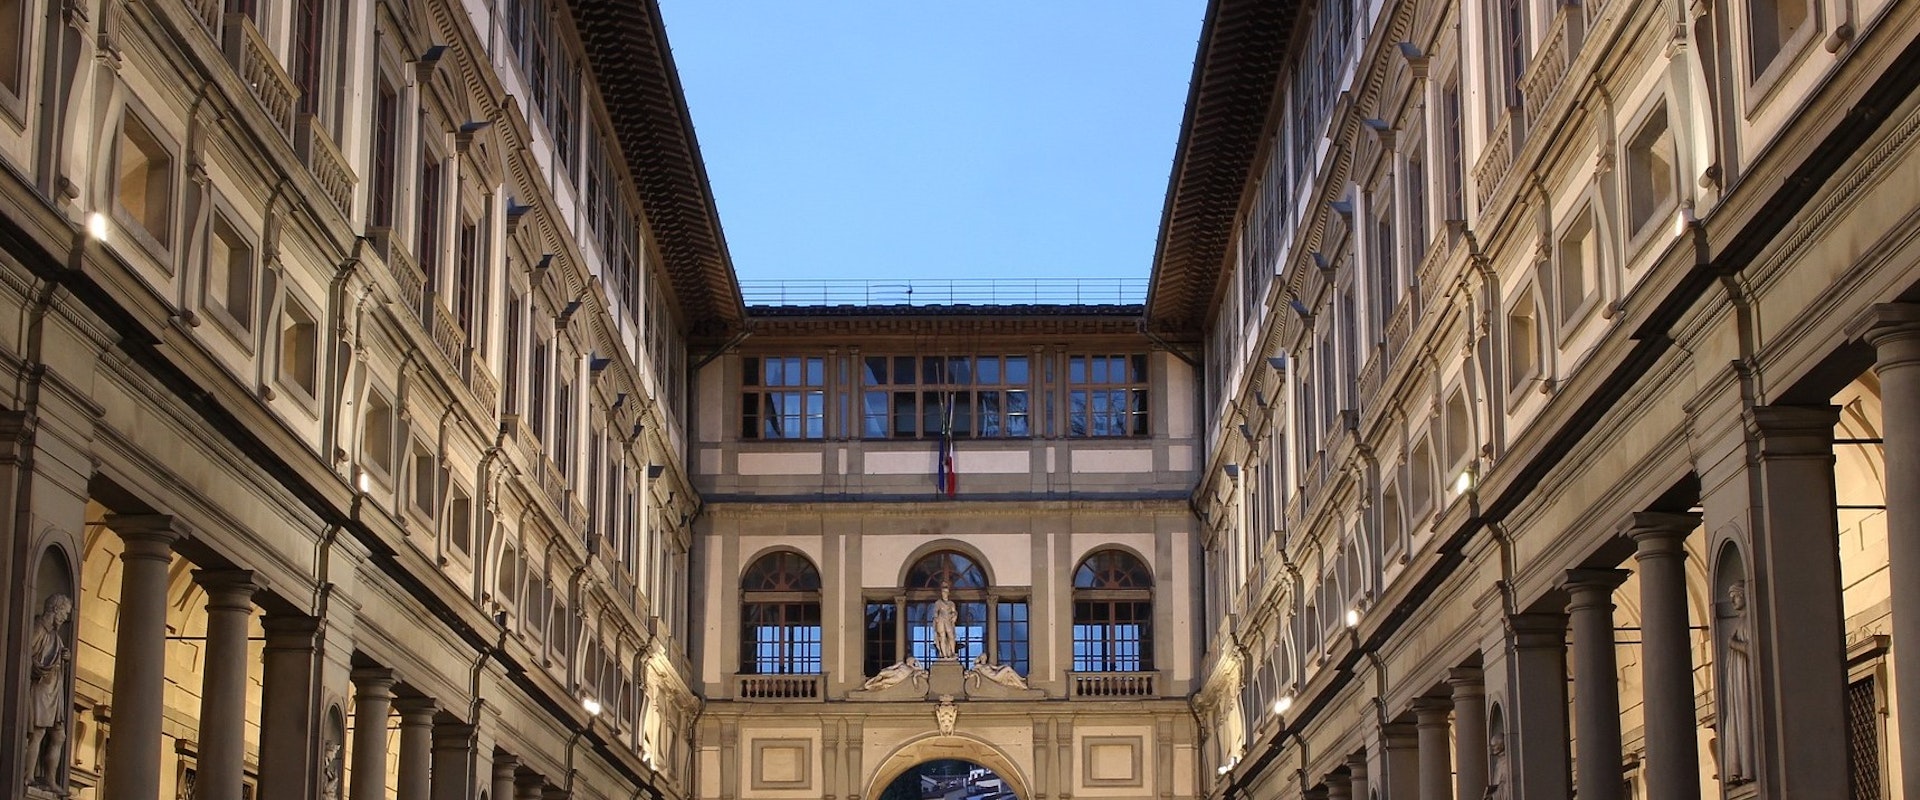 Night at the Museum 2018: nocturnal opening of the Uffizi at €1!